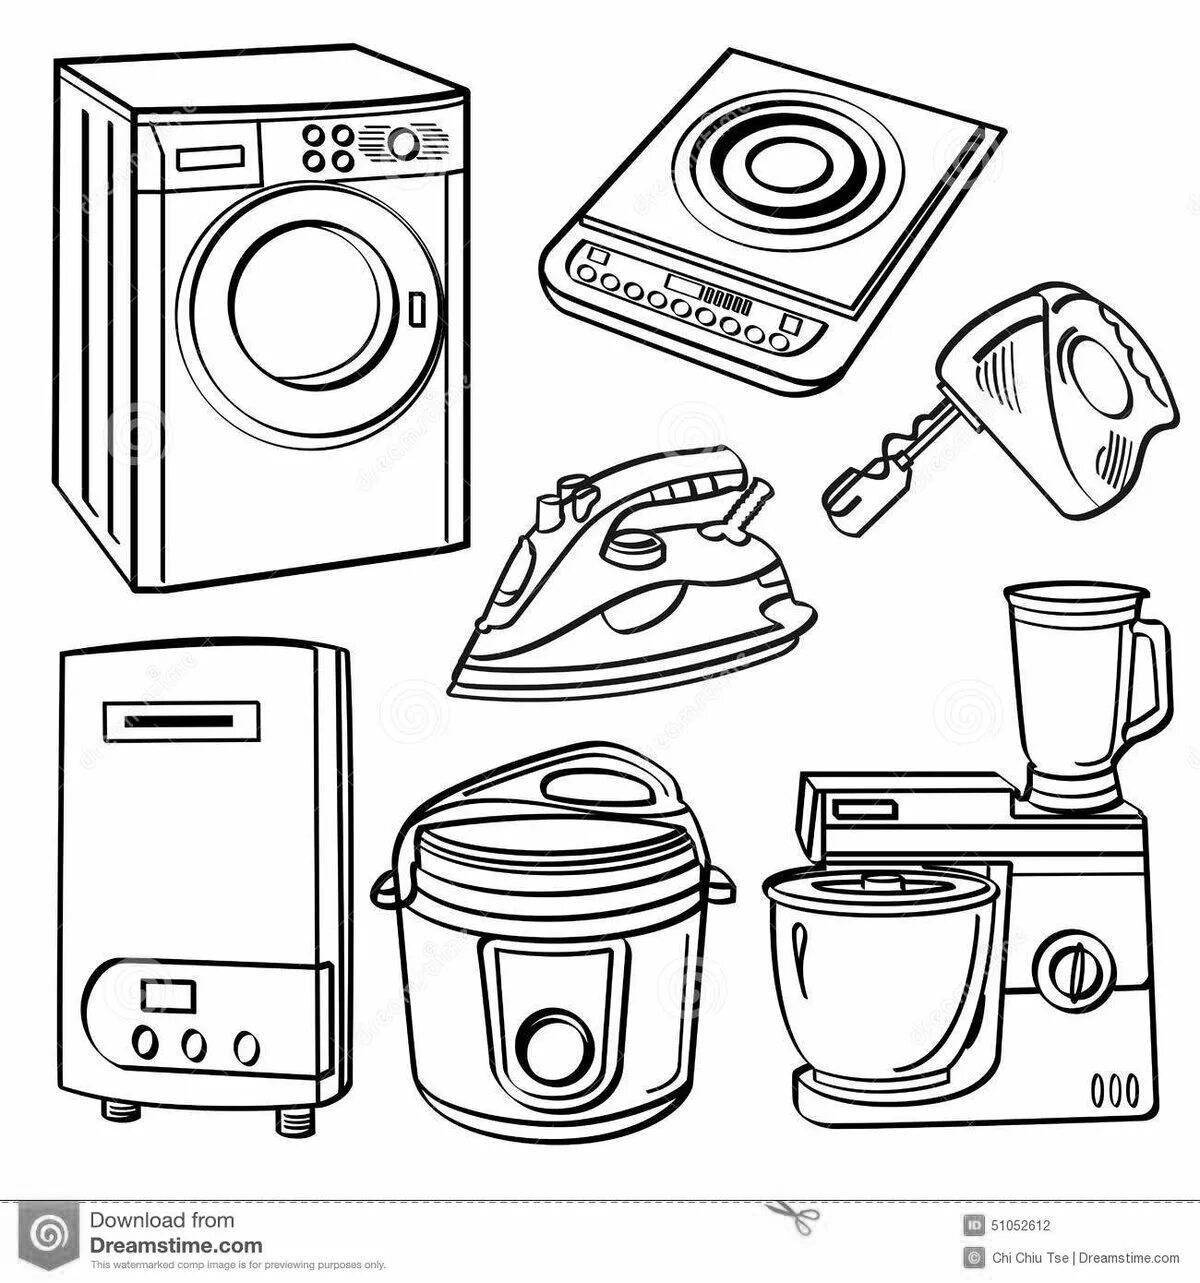 Fun coloring house appliances for youth